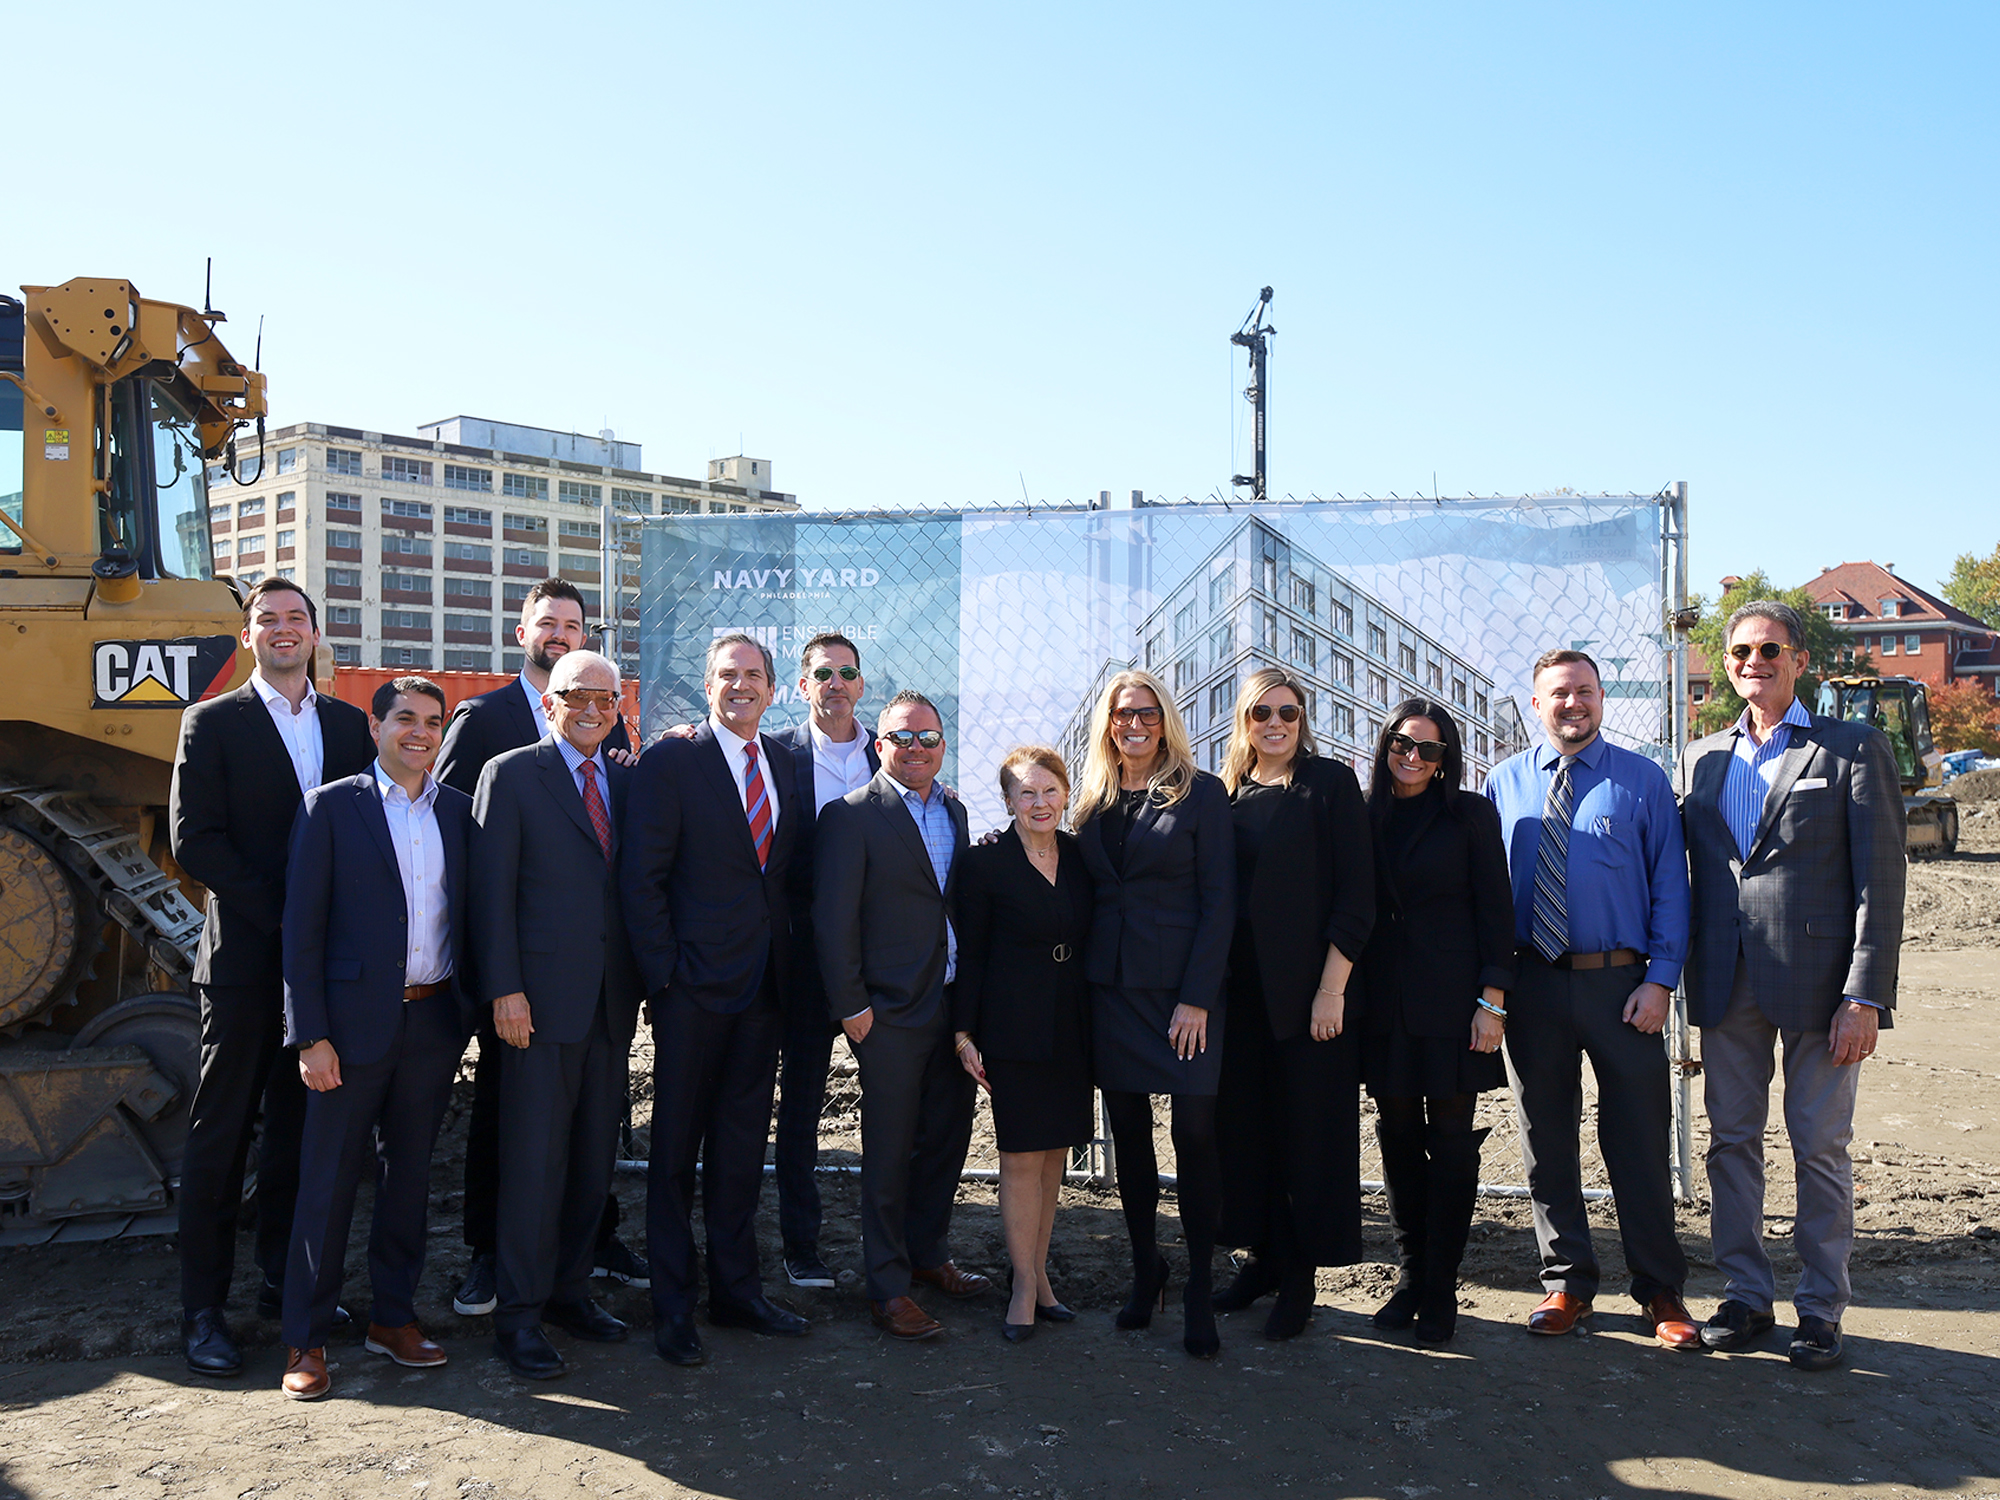 AVE Navy Yard groundbreaking team photo with image of future building in background